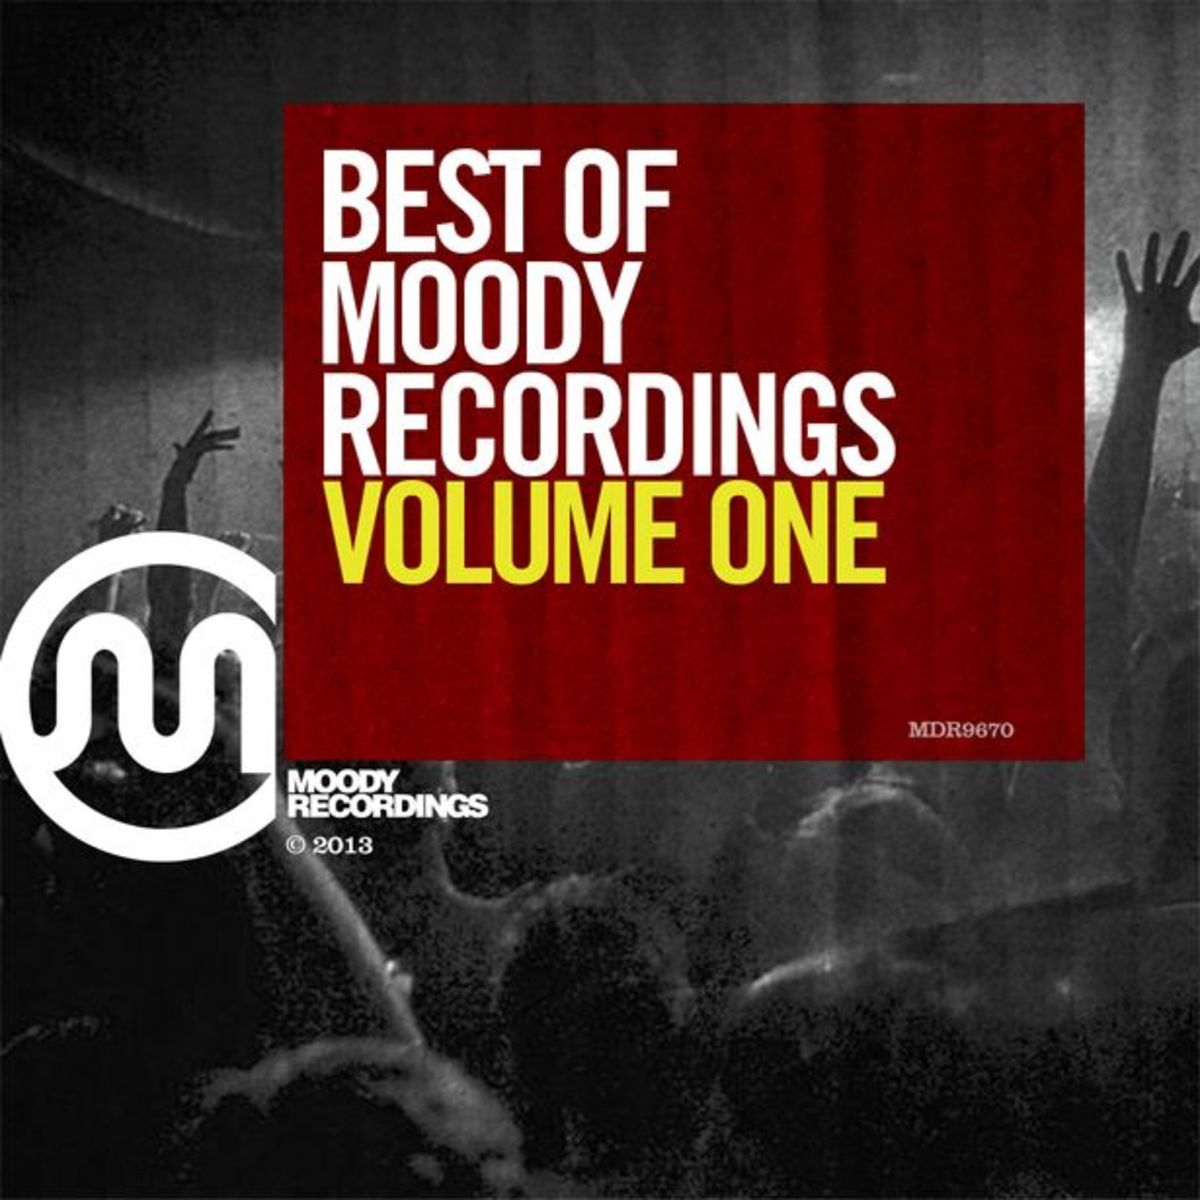 EDM News: Best Of Moody Recordings Volume 1- Out Digitally Today